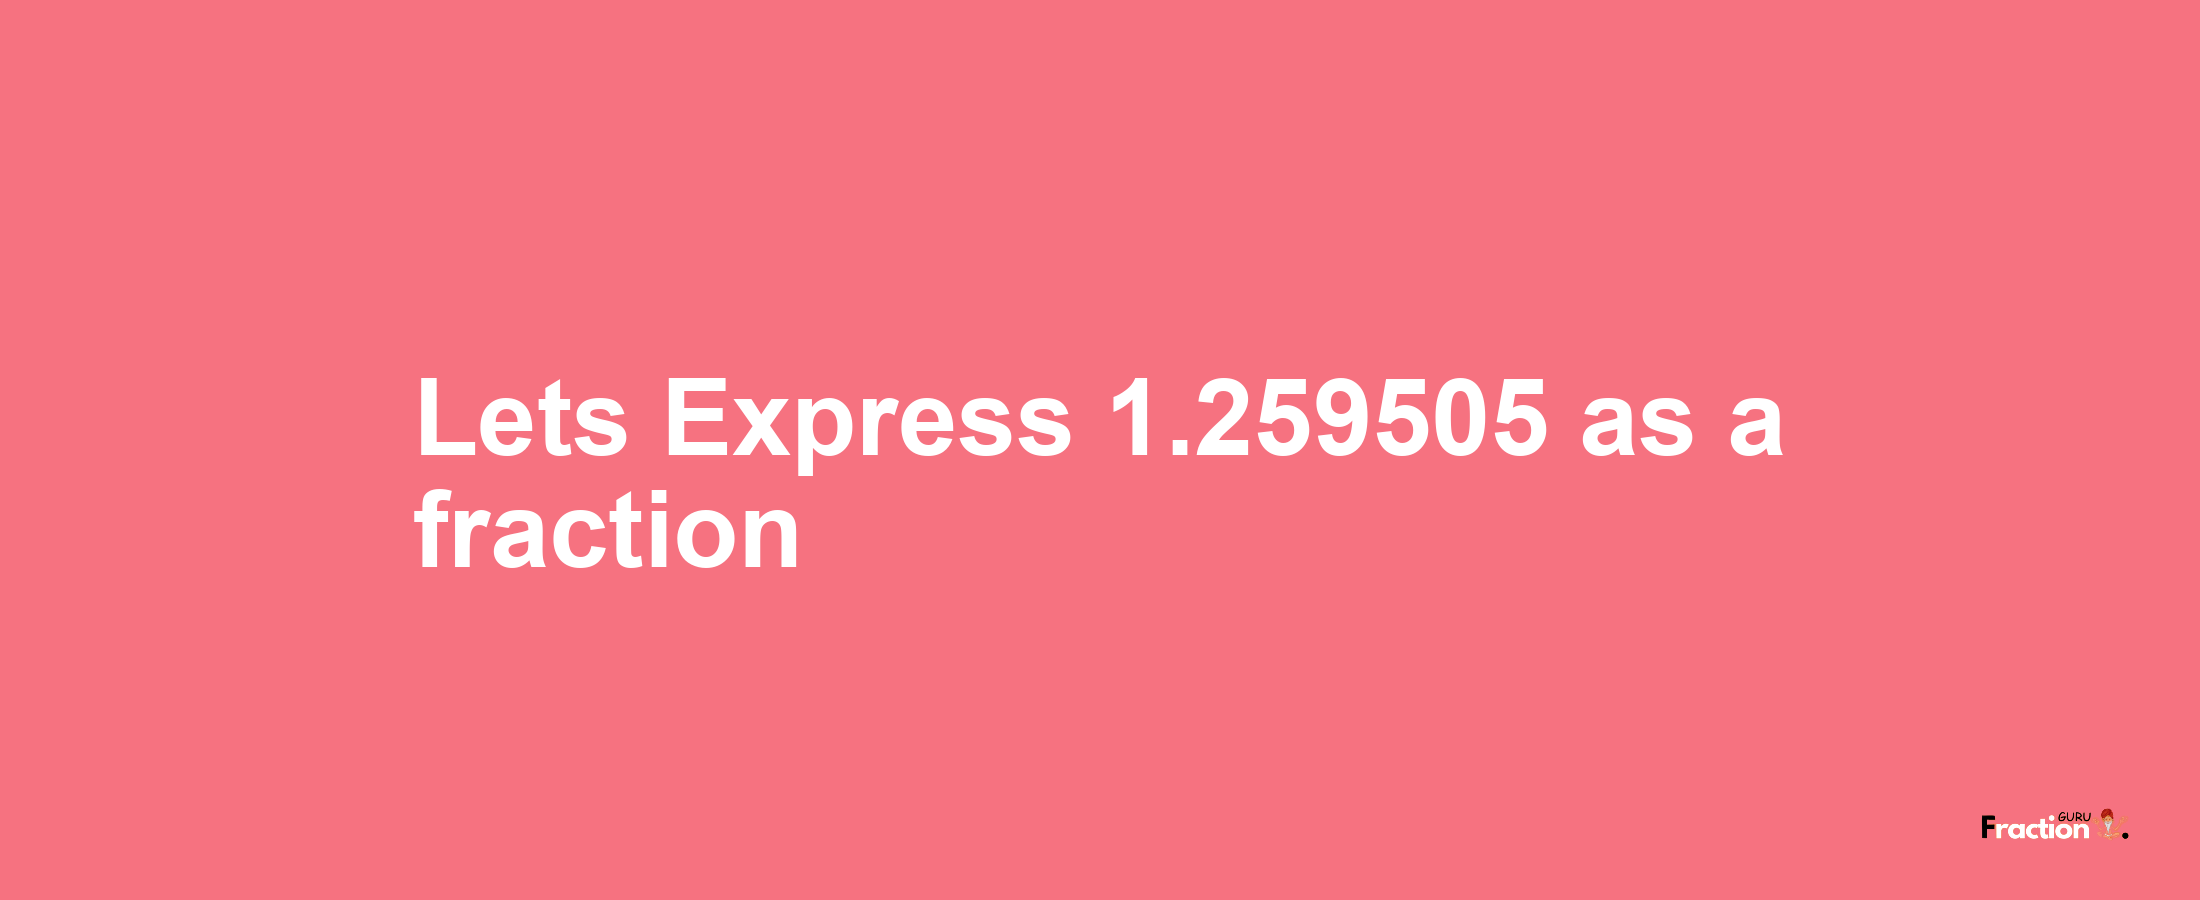 Lets Express 1.259505 as afraction